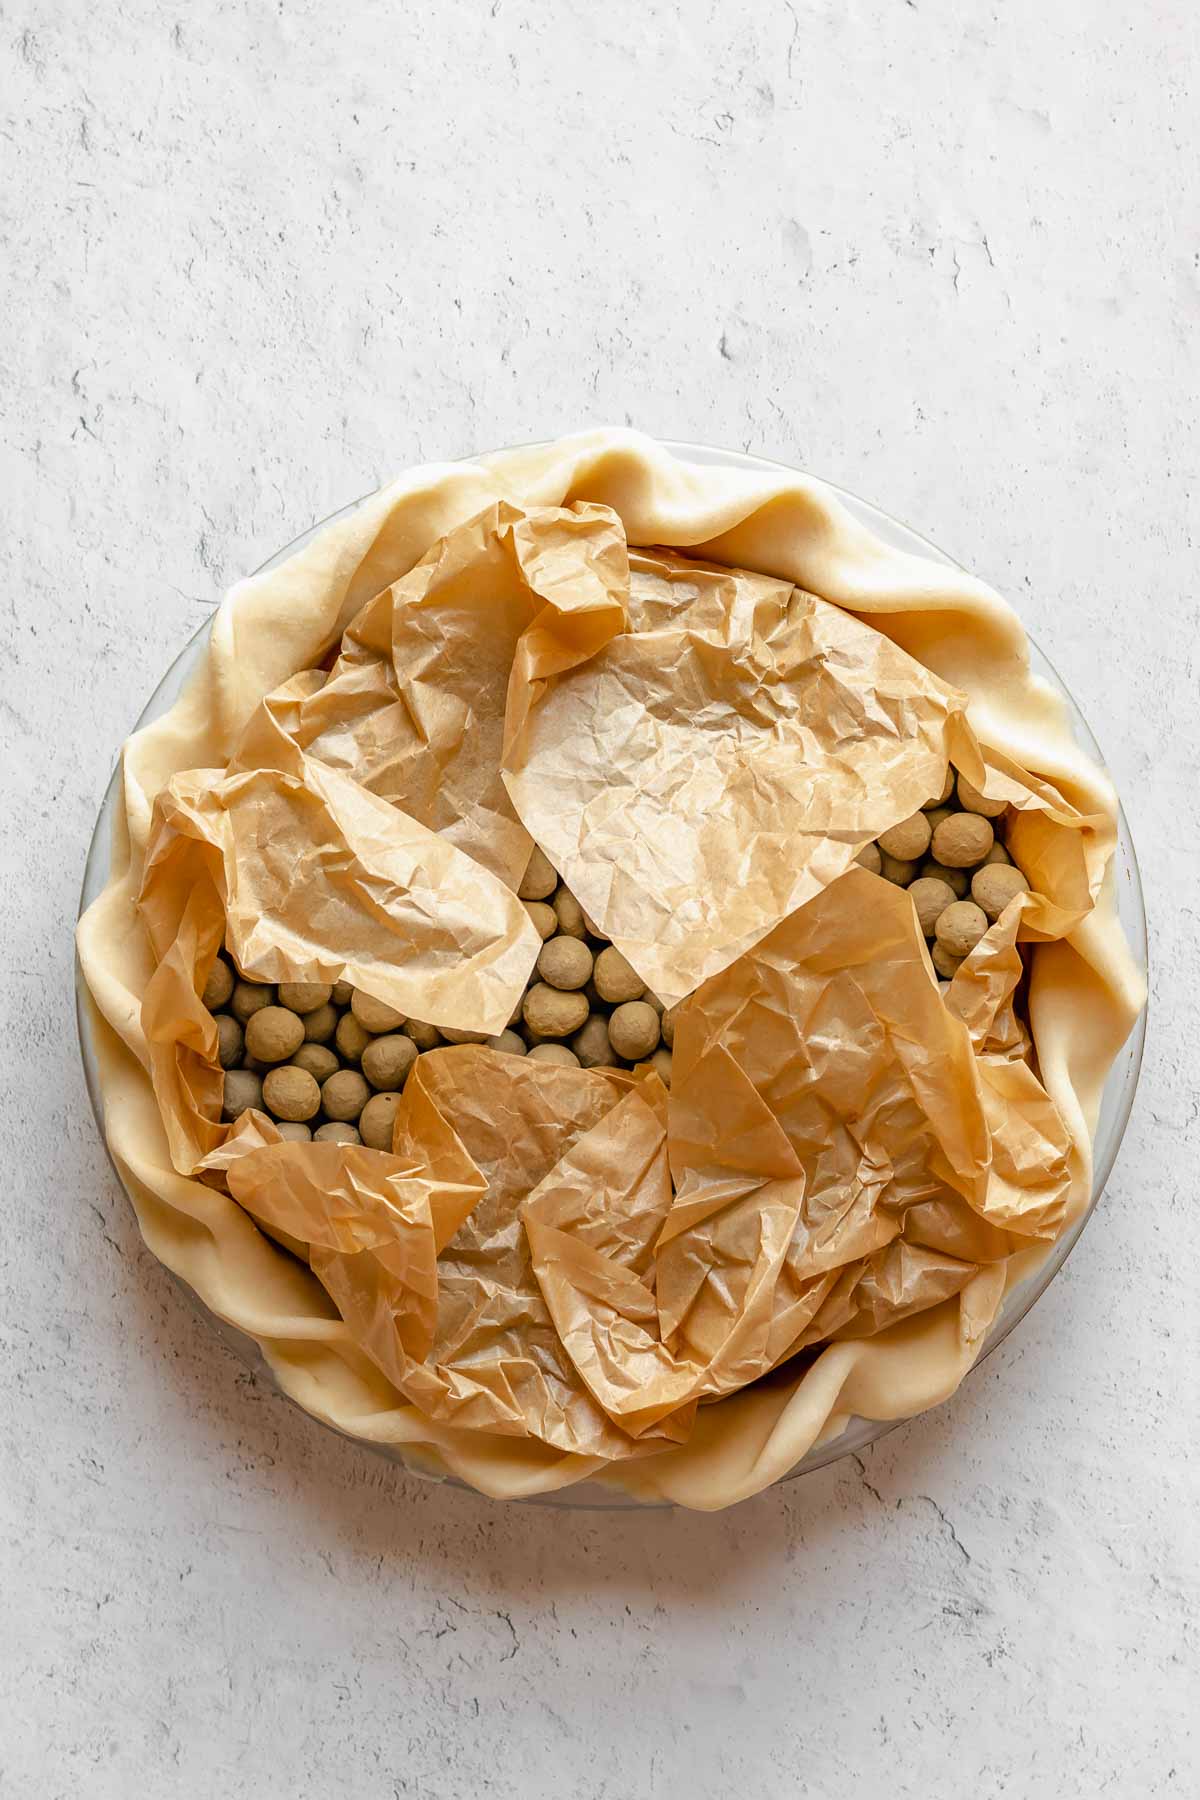 Parchment paper and weights in a pie crust.